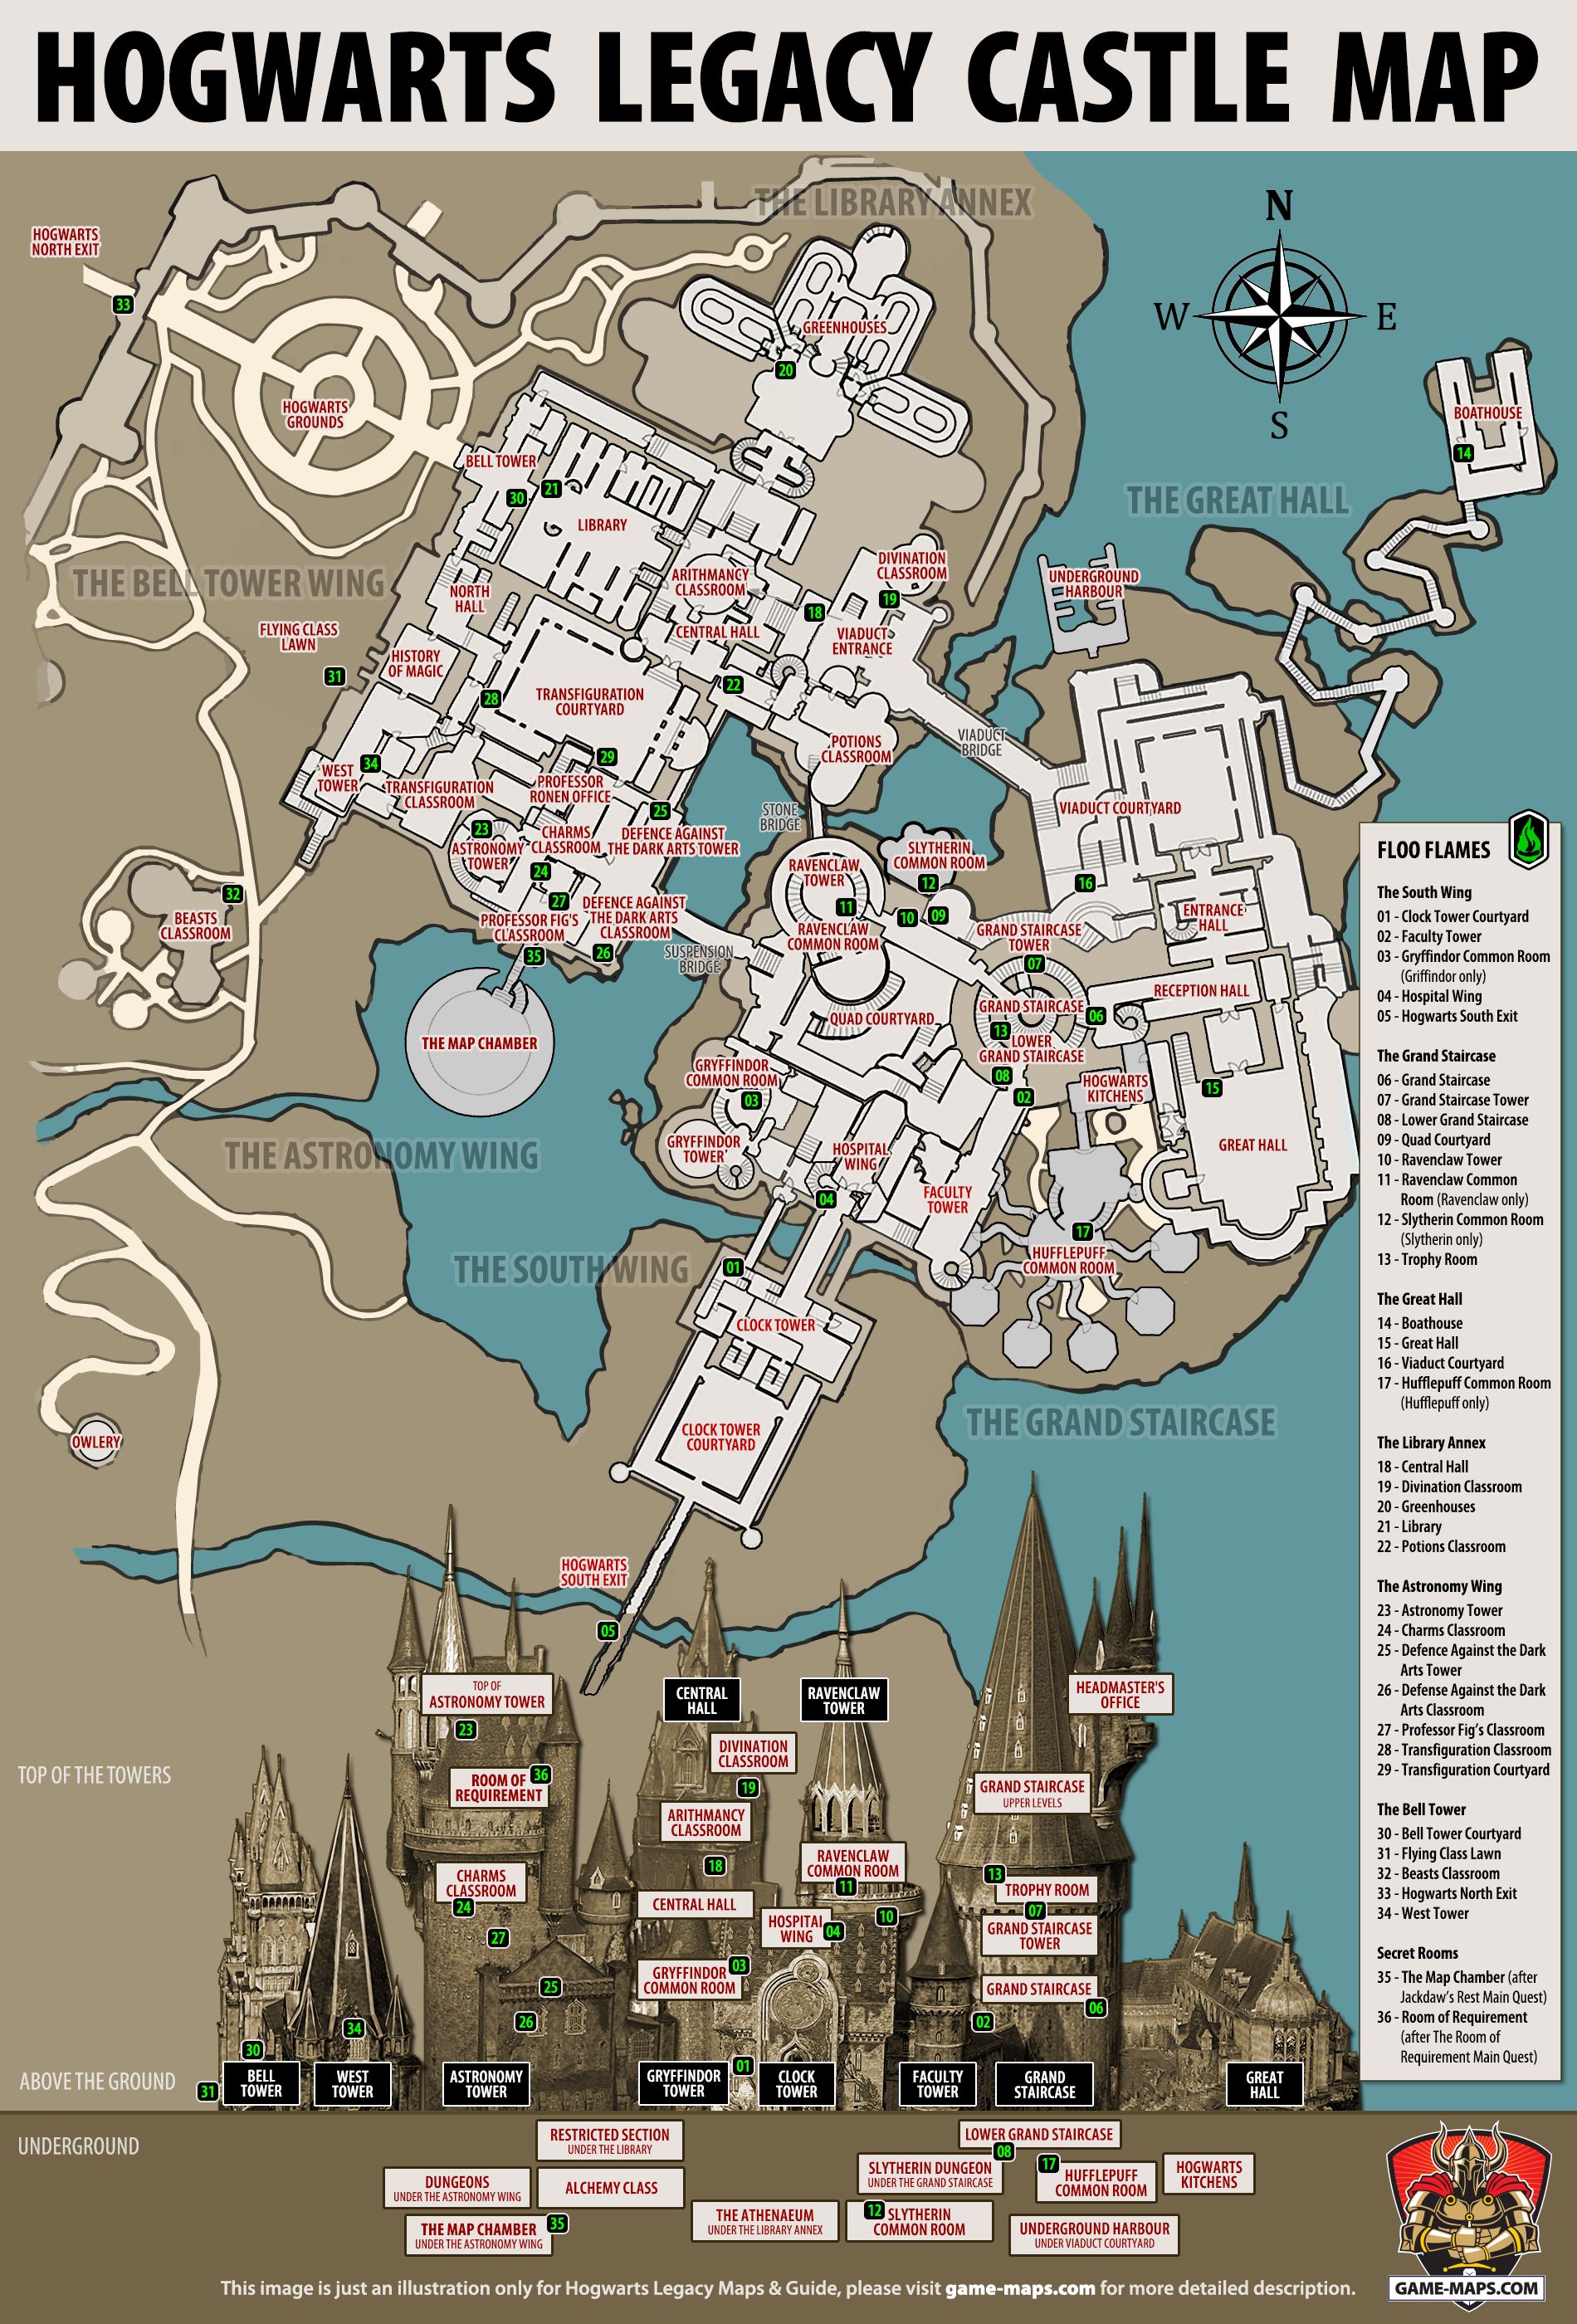 Hogwarts Legacy Map guide: All regions, towns, locations & more - Dexerto